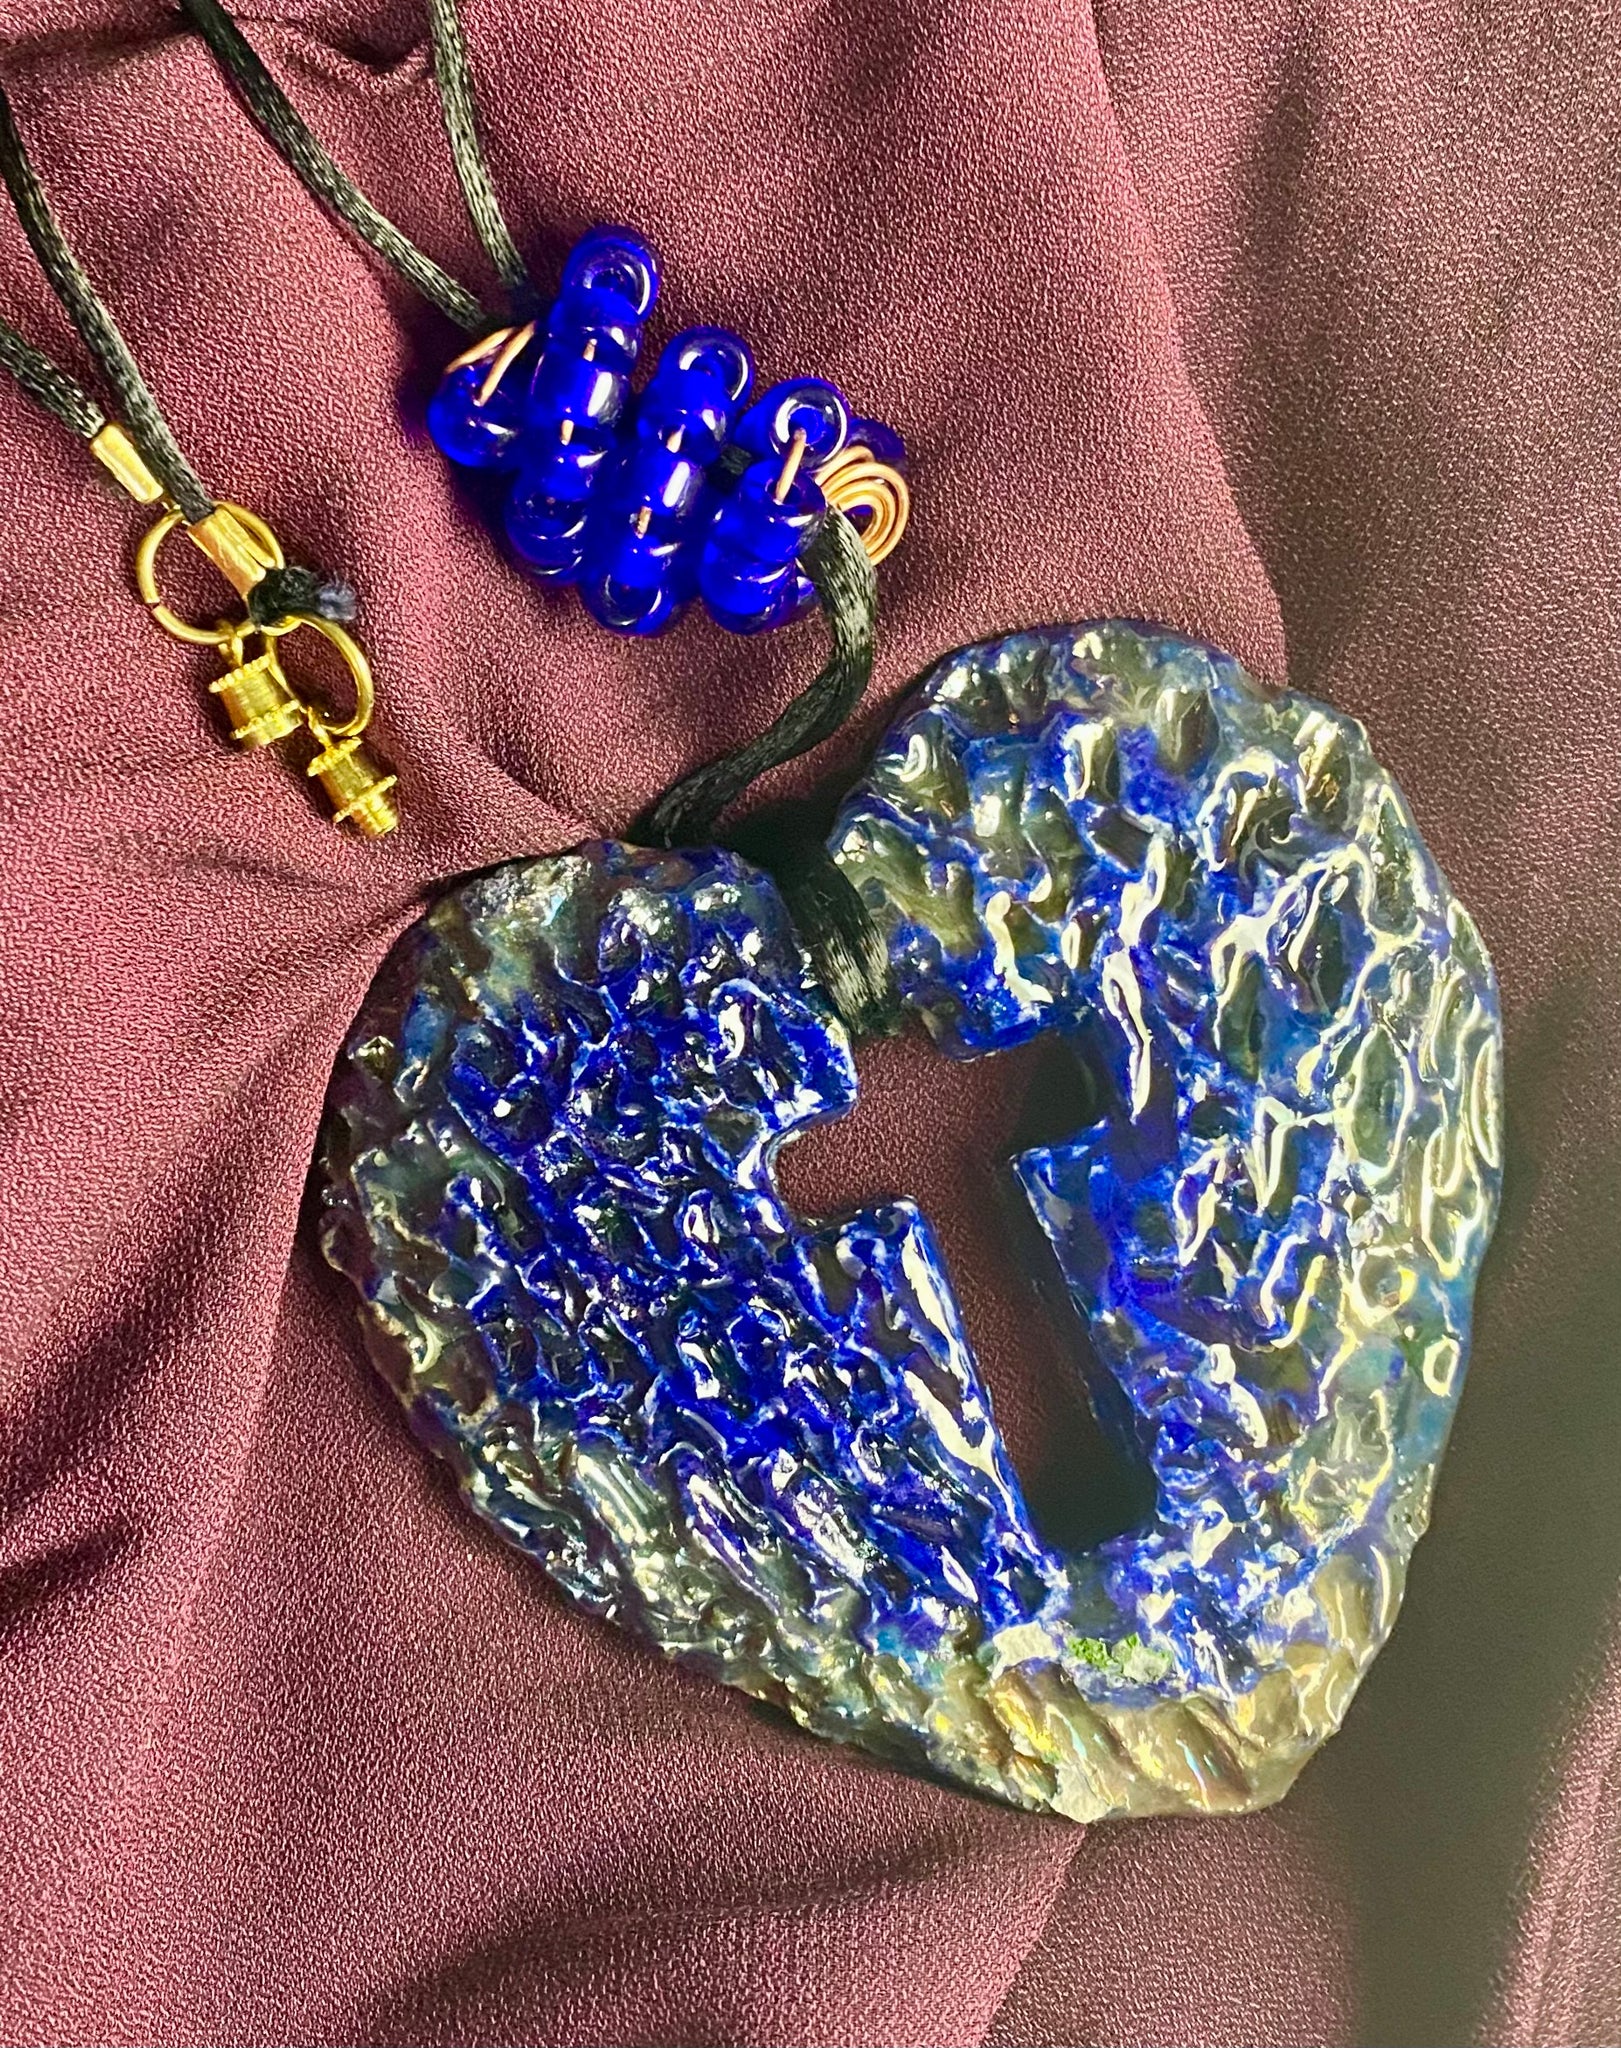  Have A Heart ! Each heart pendant is handmade with love! It is 3"x 3" and weighs approx. 3ozs. This pendant has a royal blue and gold metallic raku glazes that renders a unique translucent  patina. The heart has a cut out cross in the center with a textured  pattern. It holds a spiral of royal blue mini beads on a spiral copper wire. This pendant has a nice 12" black suede cord!